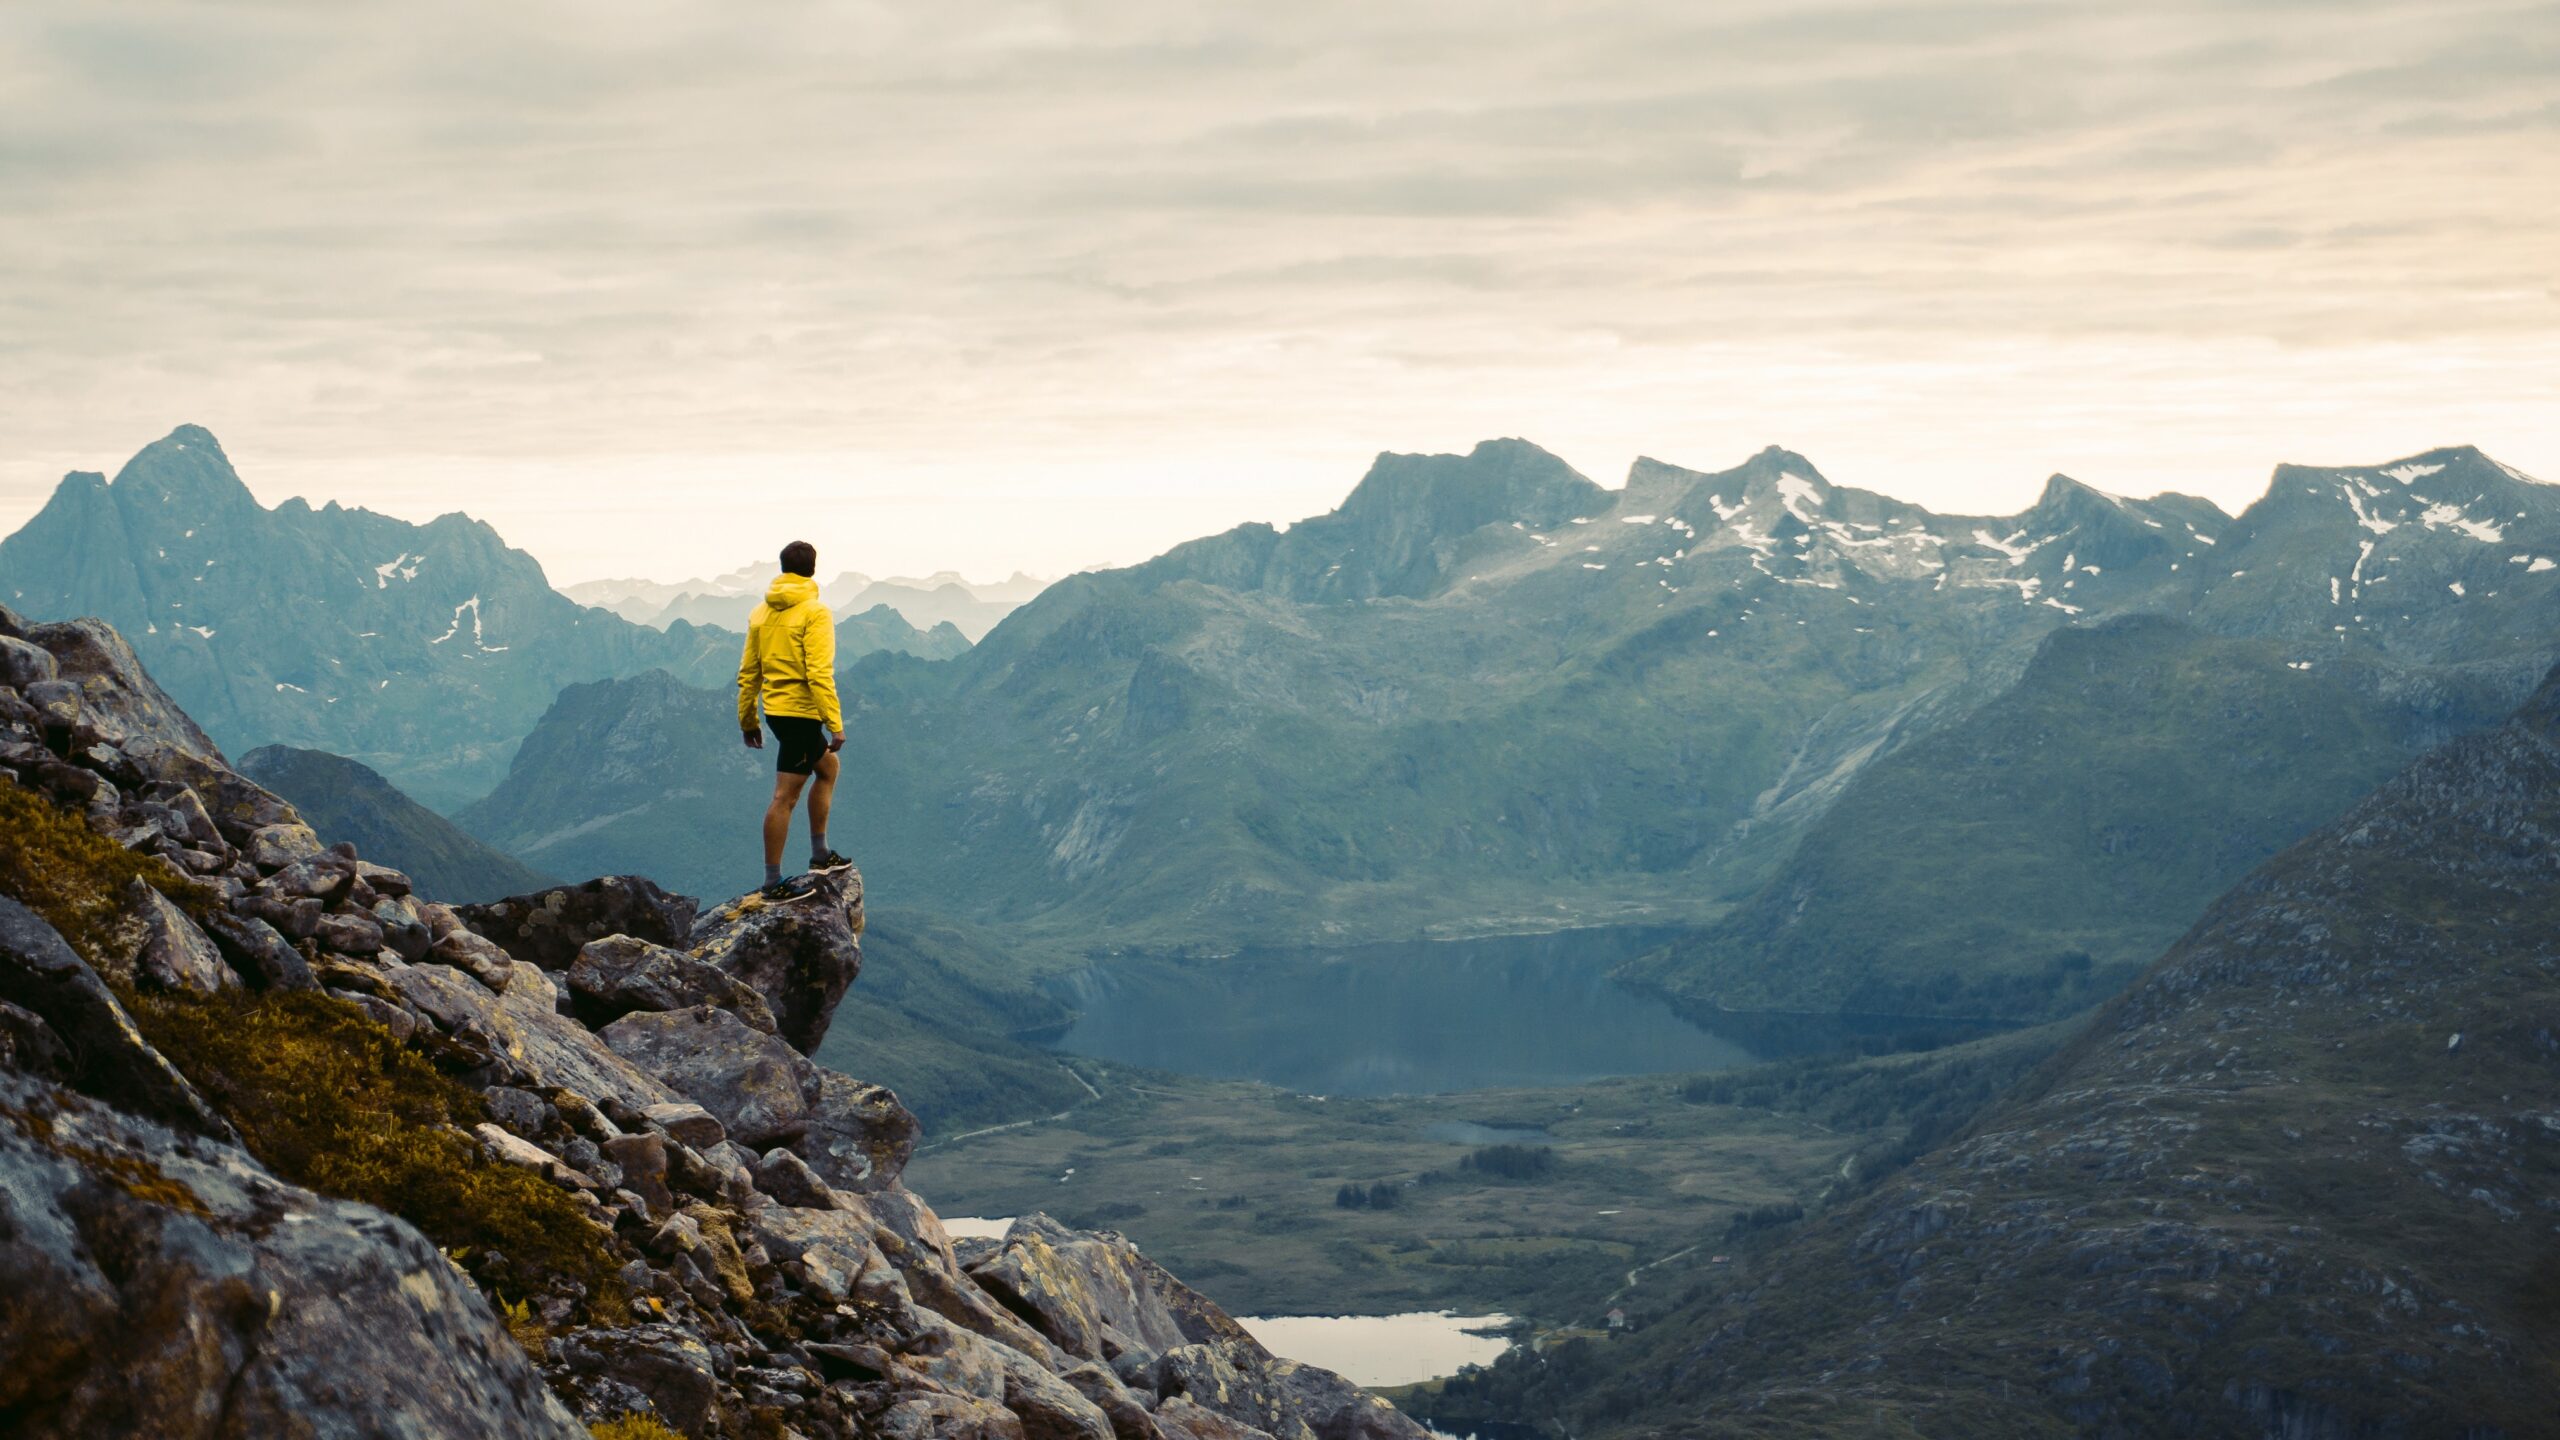 Picture of a man in a yellow jacket standing on a mountain looking out over a mountain landscape